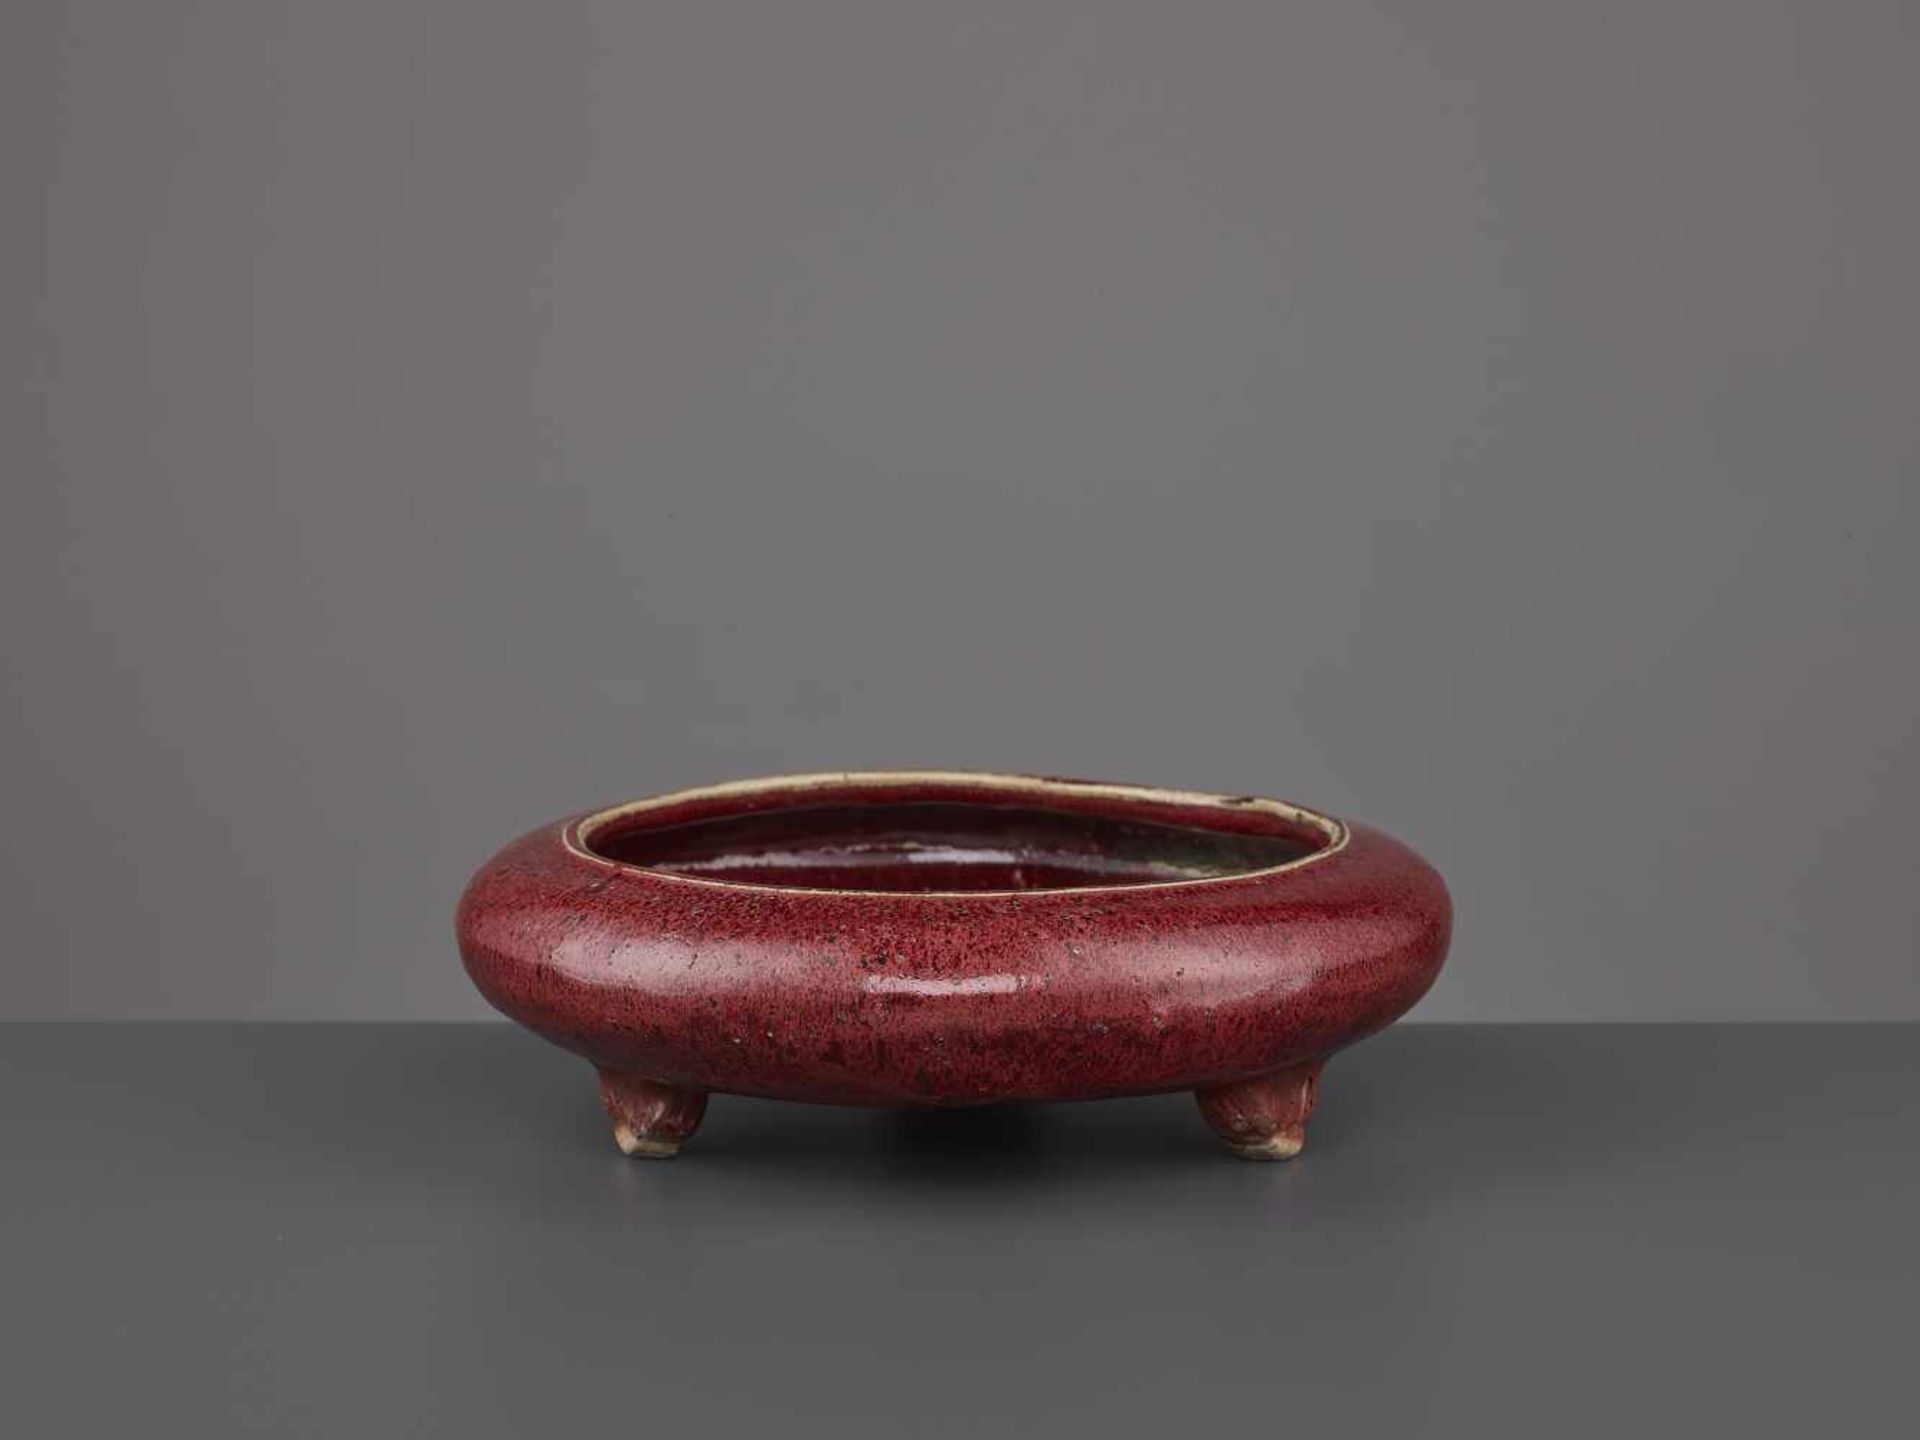 A LANGYAO CERAMIC BOWL, QING DYNASTYChina, 18th - 19th century. Vitreous deep-red glaze, featuring - Image 2 of 6